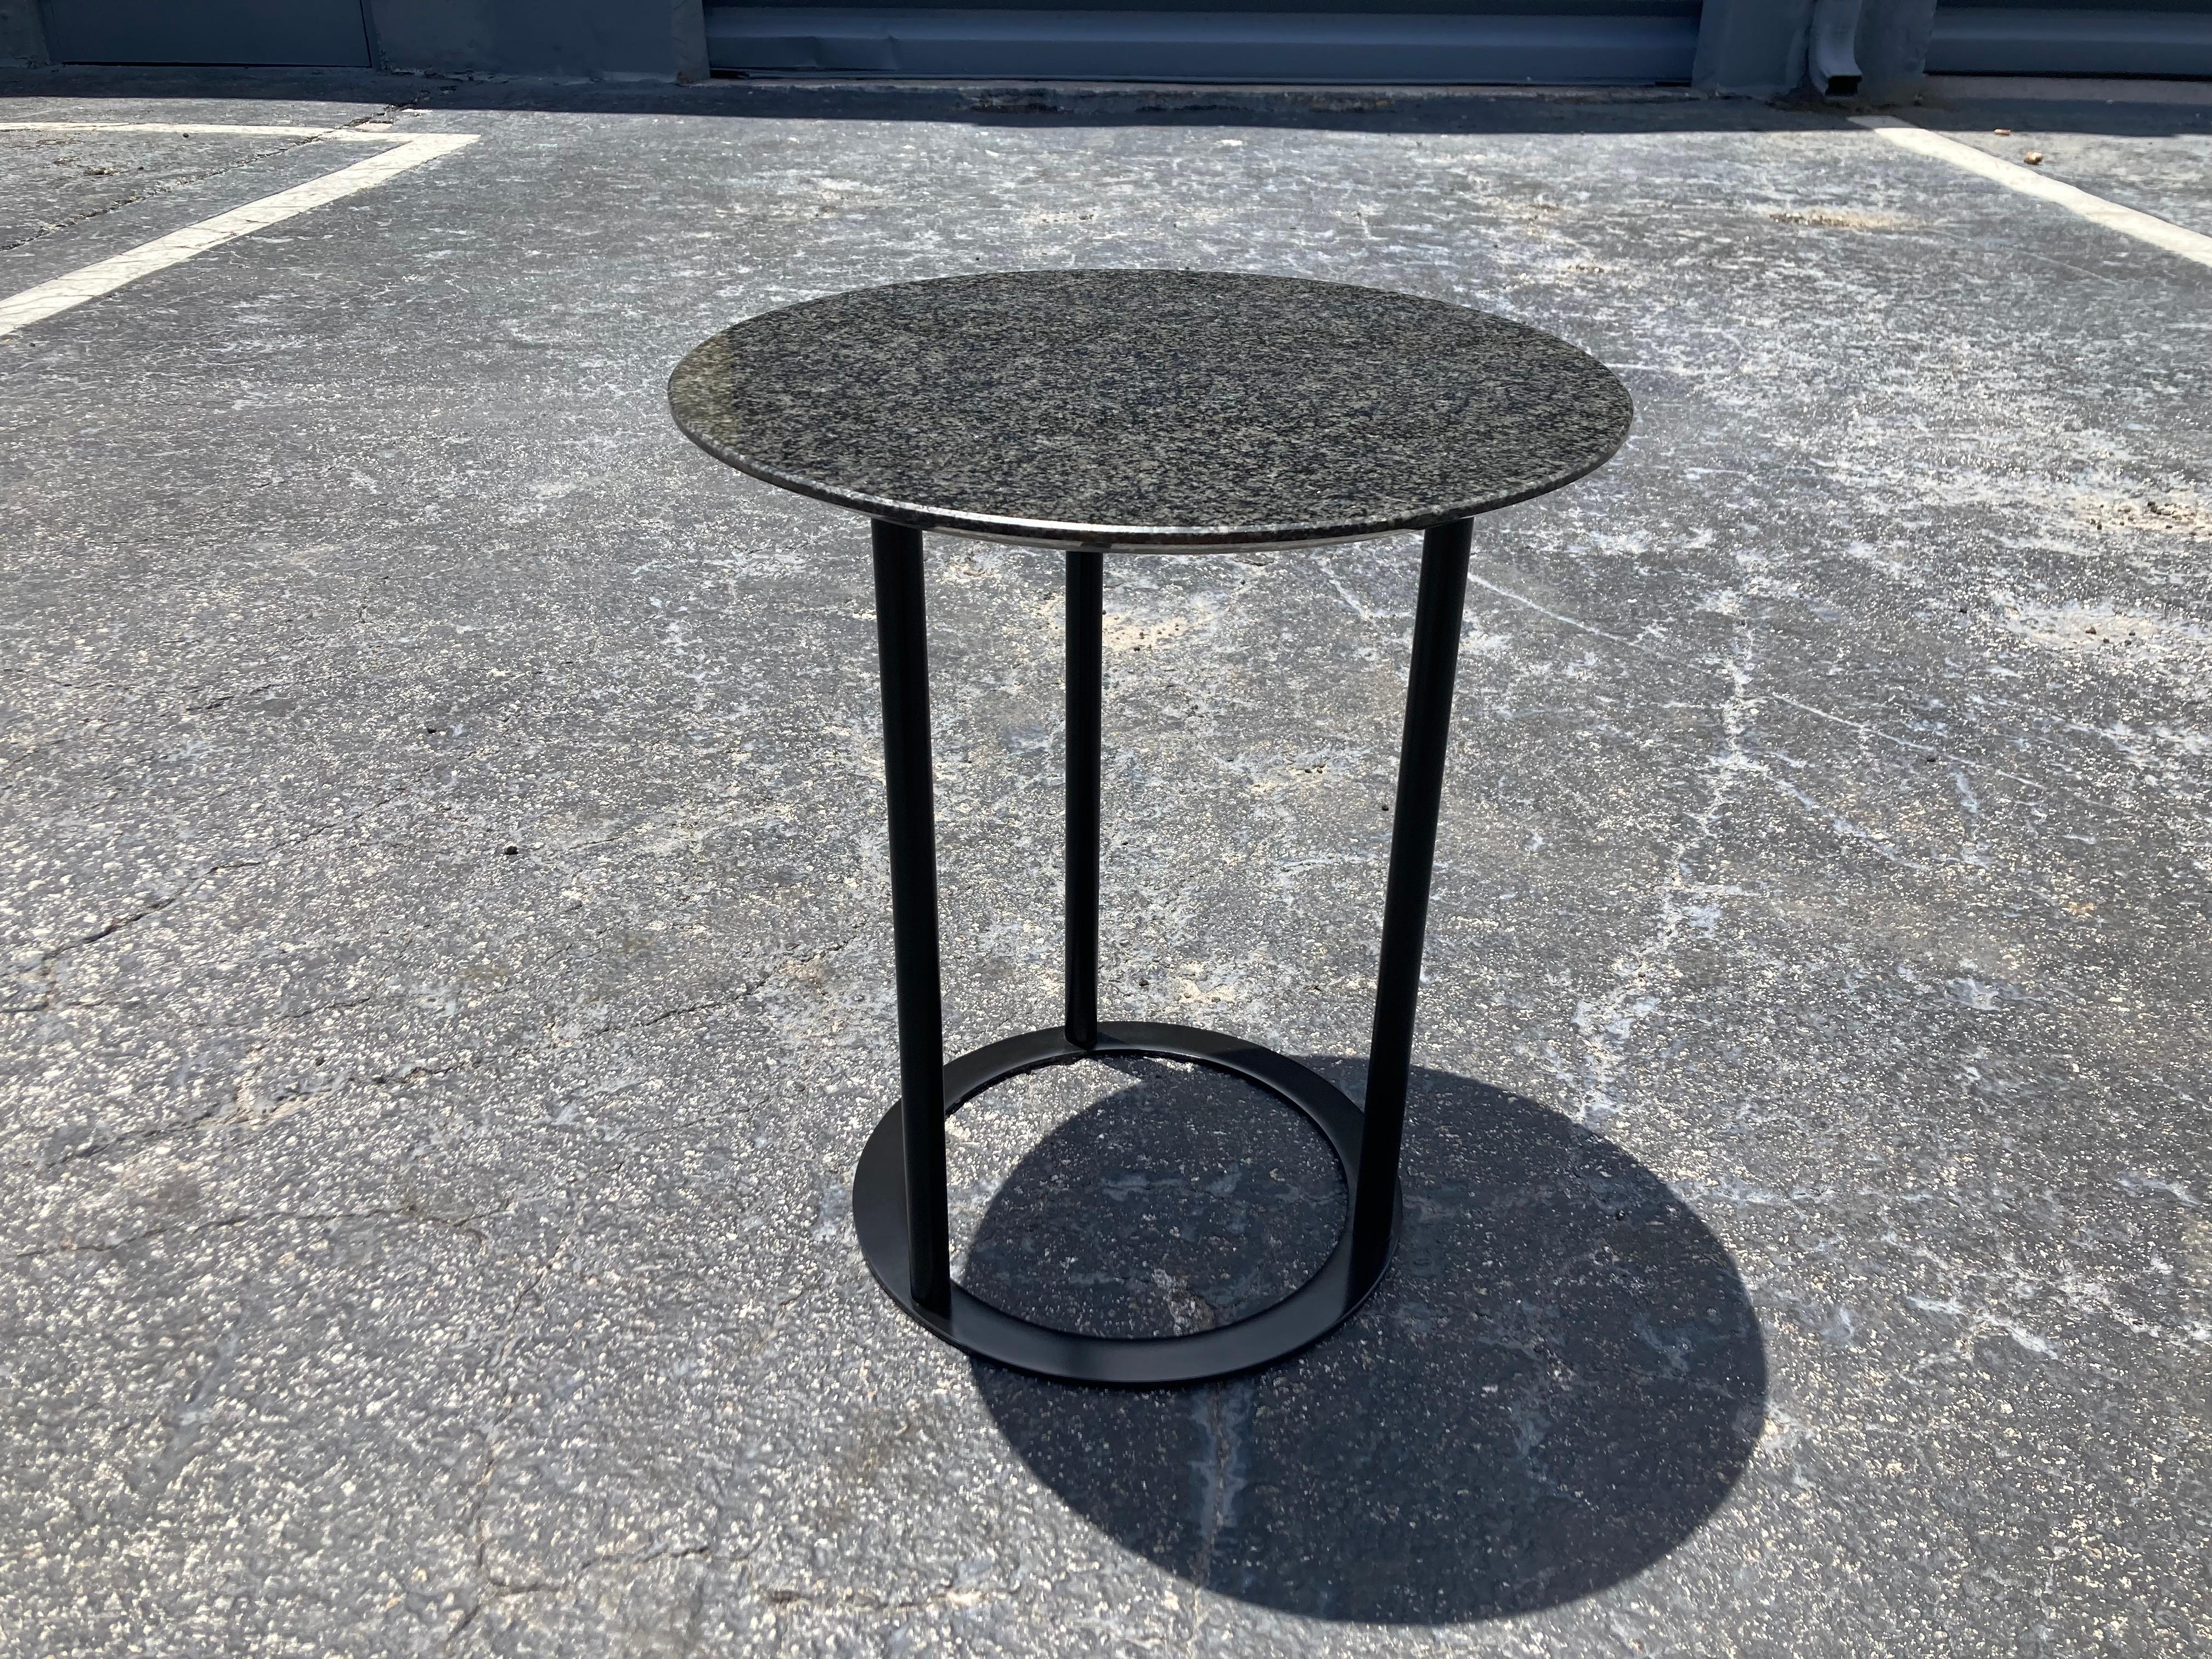 Side Table by Laura Griziotti for Arflex, black painted steel base and Granite top. No longer in production.